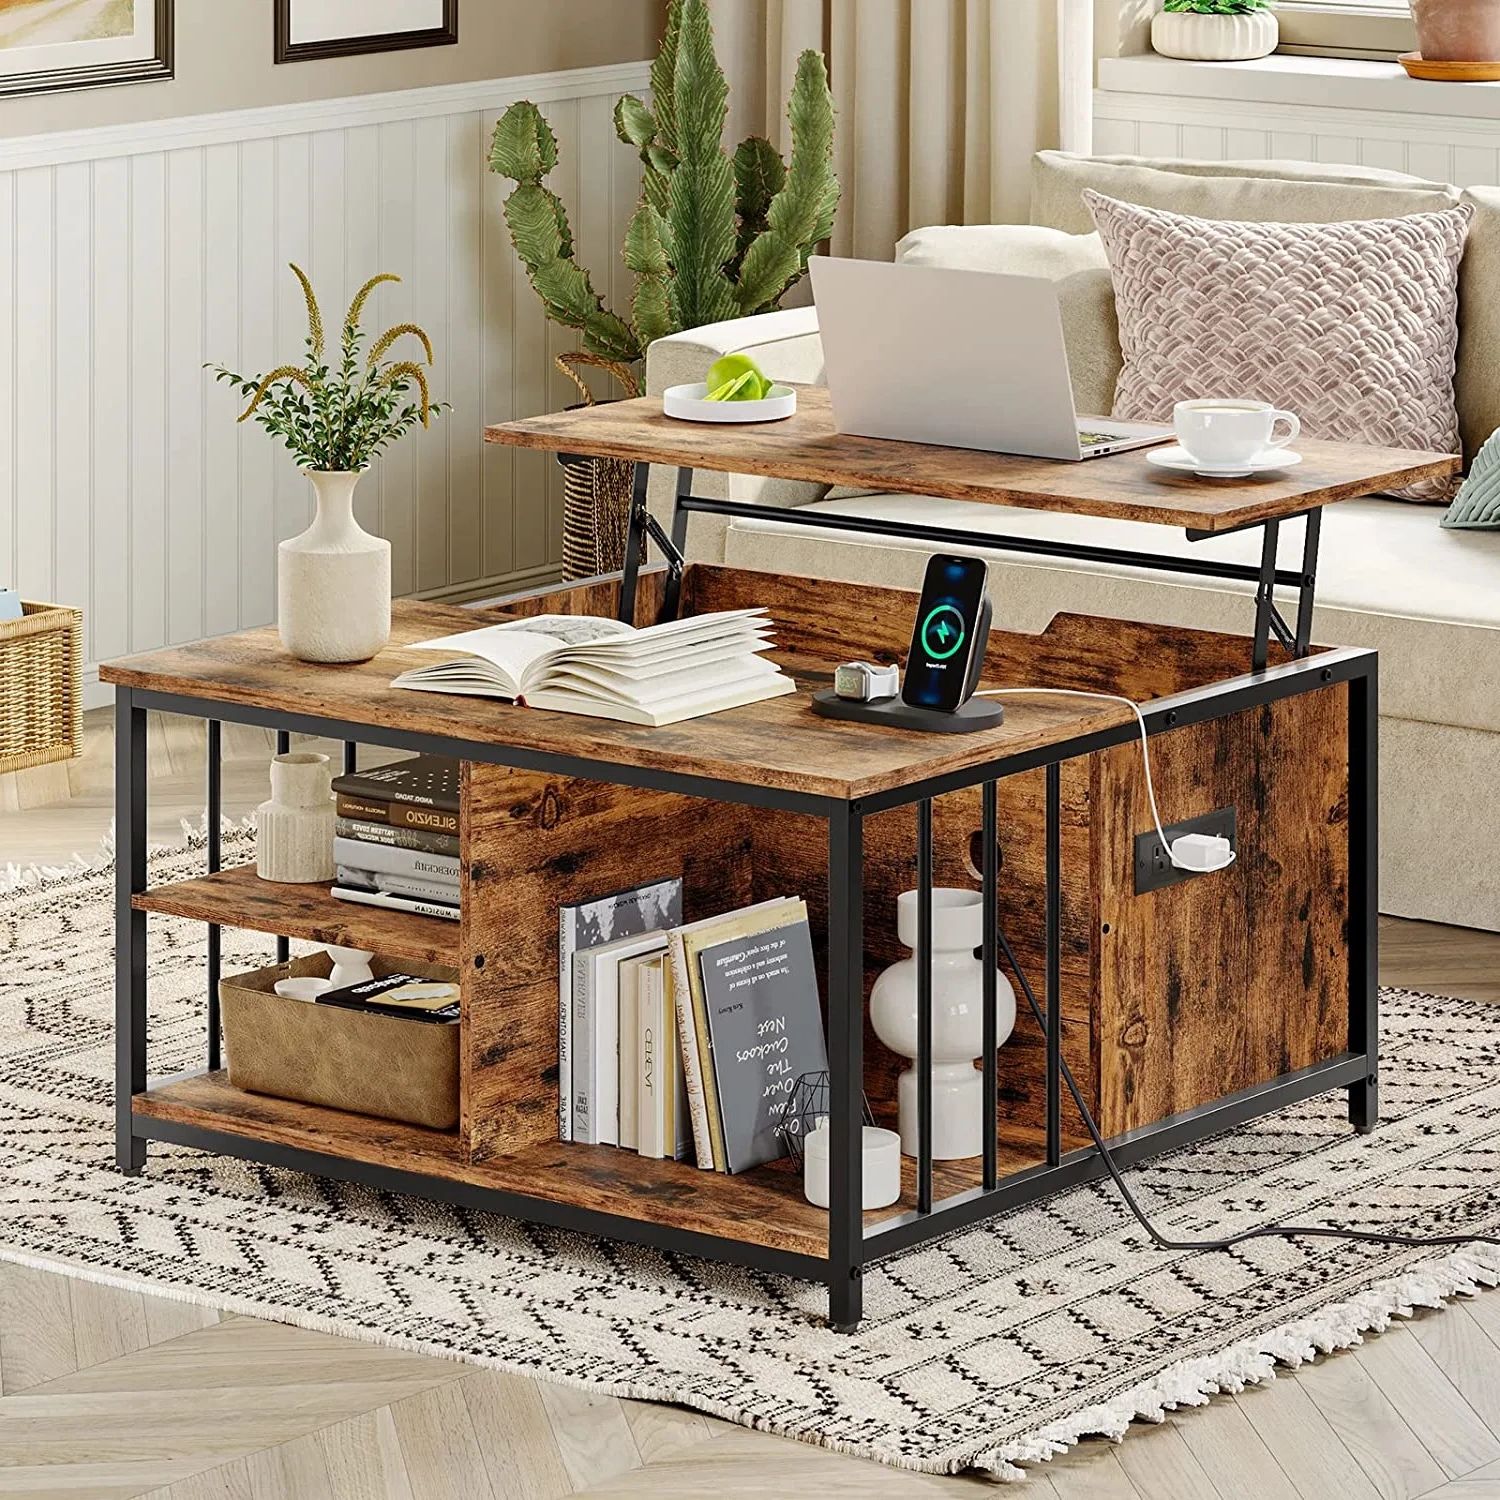 Fashionable Lift Top Coffee Tables With Hidden Storage Compartments With Farmhouse Square Lift Top Coffee Table With Storage And Hidden Compartment  Charging Station – China Coffee Table, Lift Top Coffee Table (Photo 10 of 10)